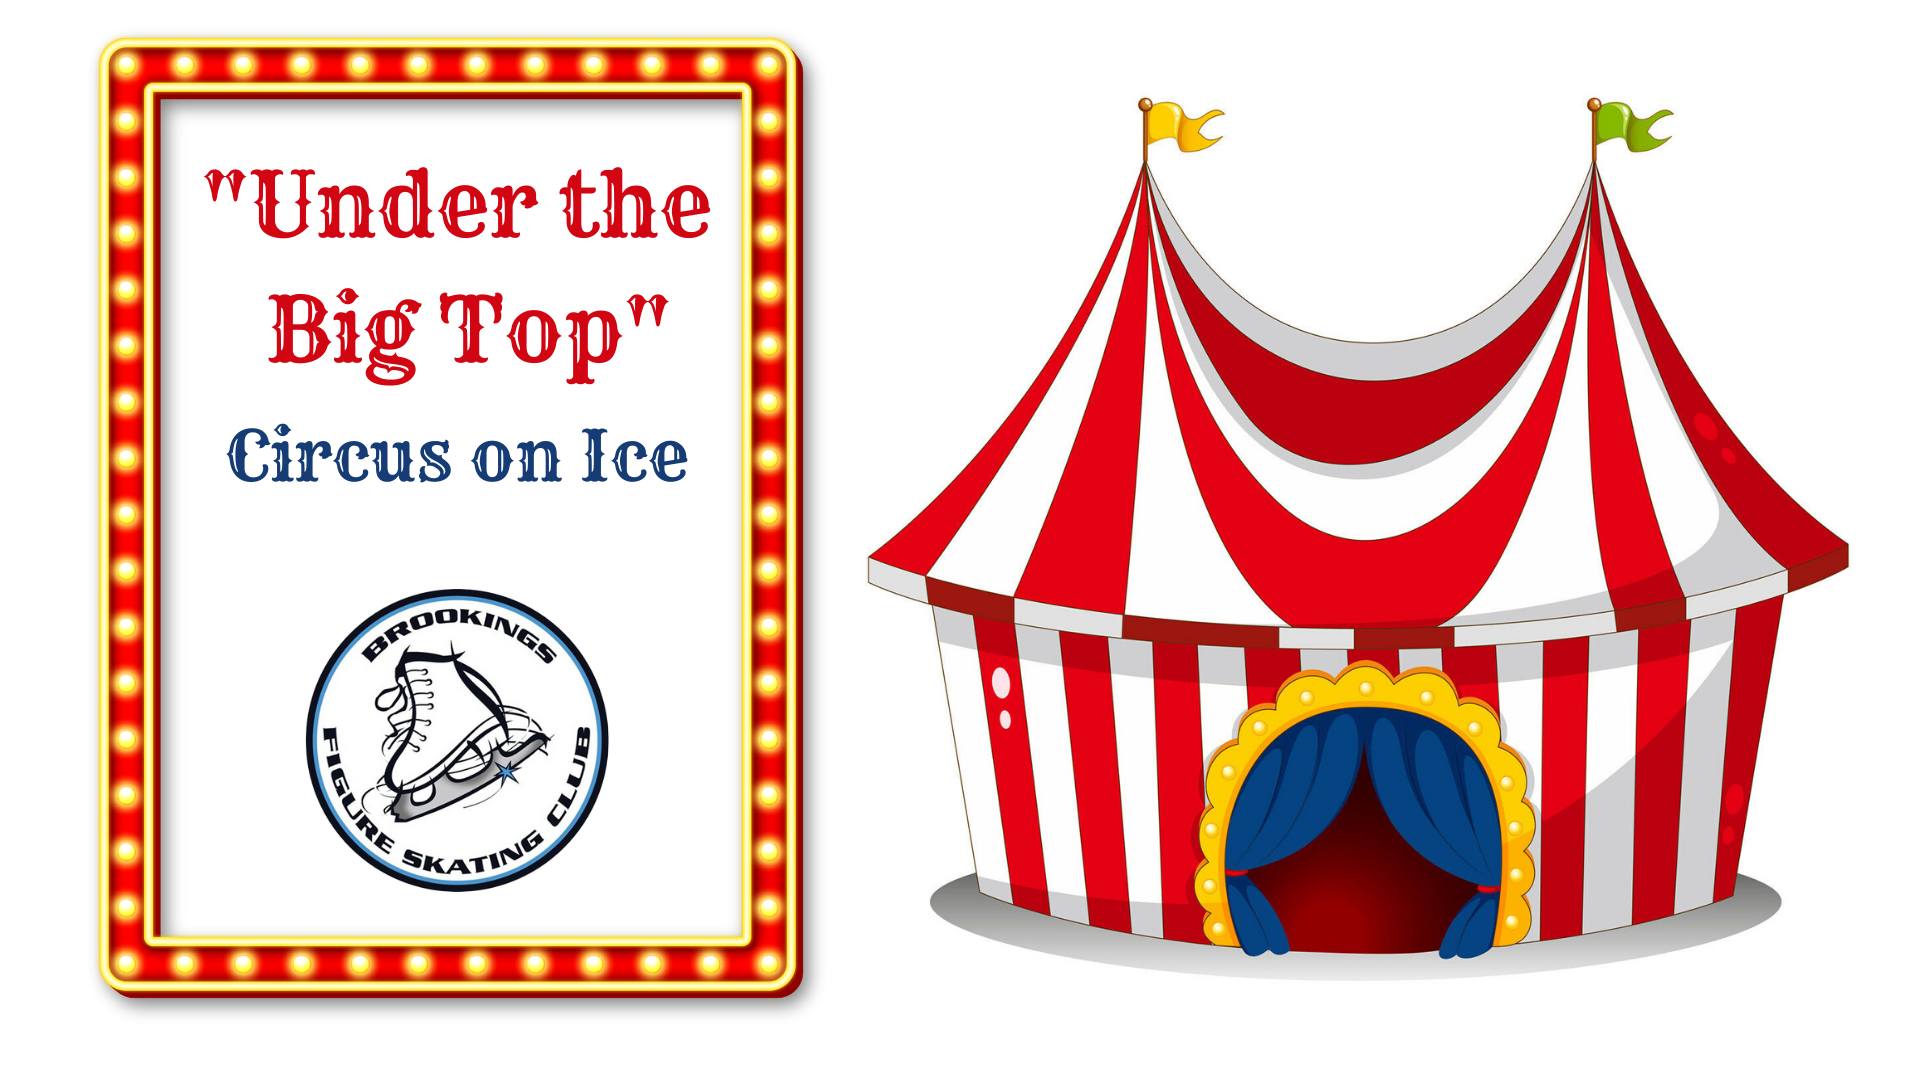 "Under the Big Top" Circus on Ice